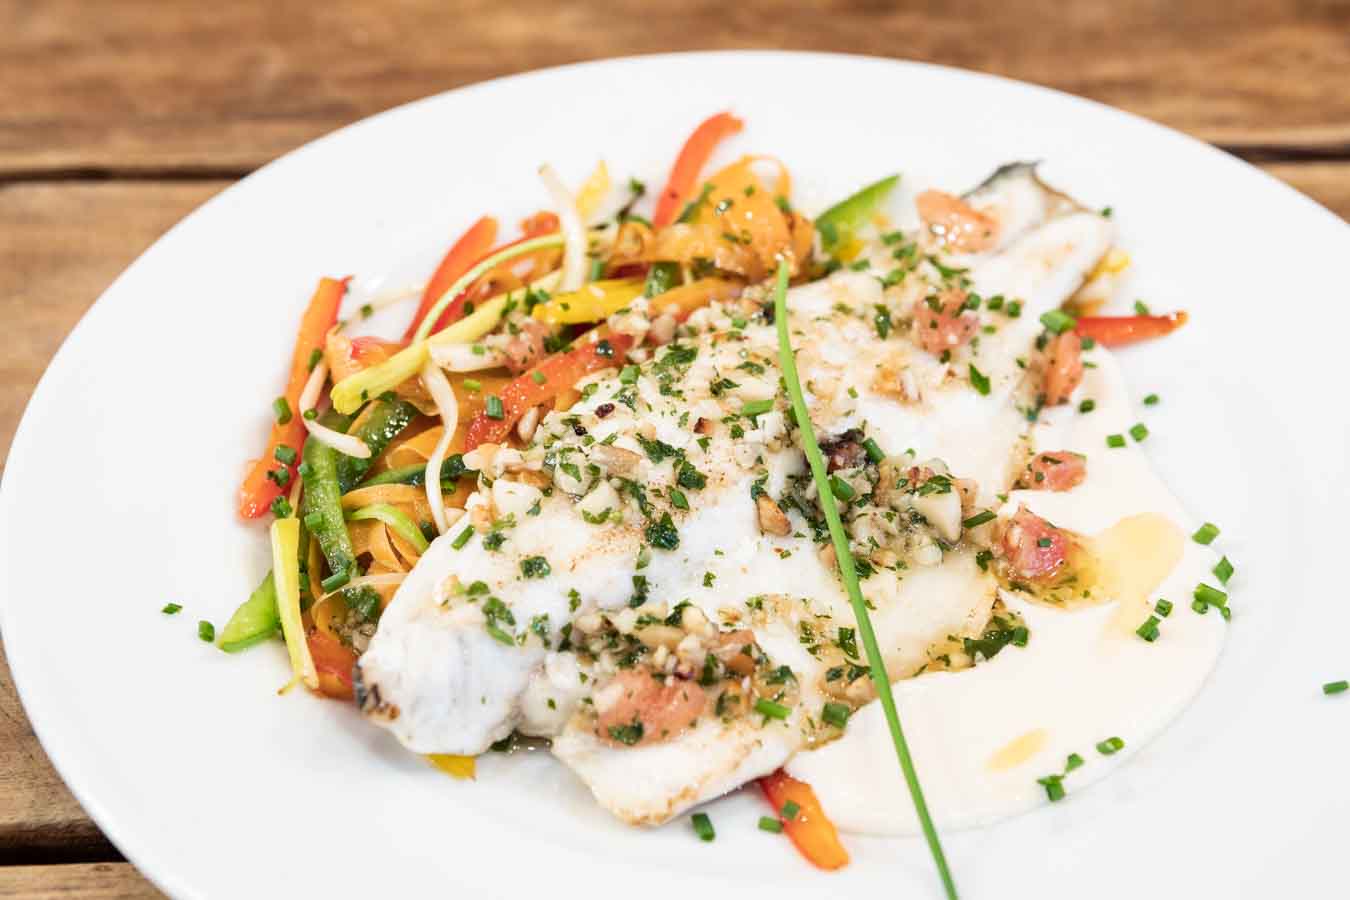 Sea bass from National Vete la Palma Park with coconut and almonds sauce